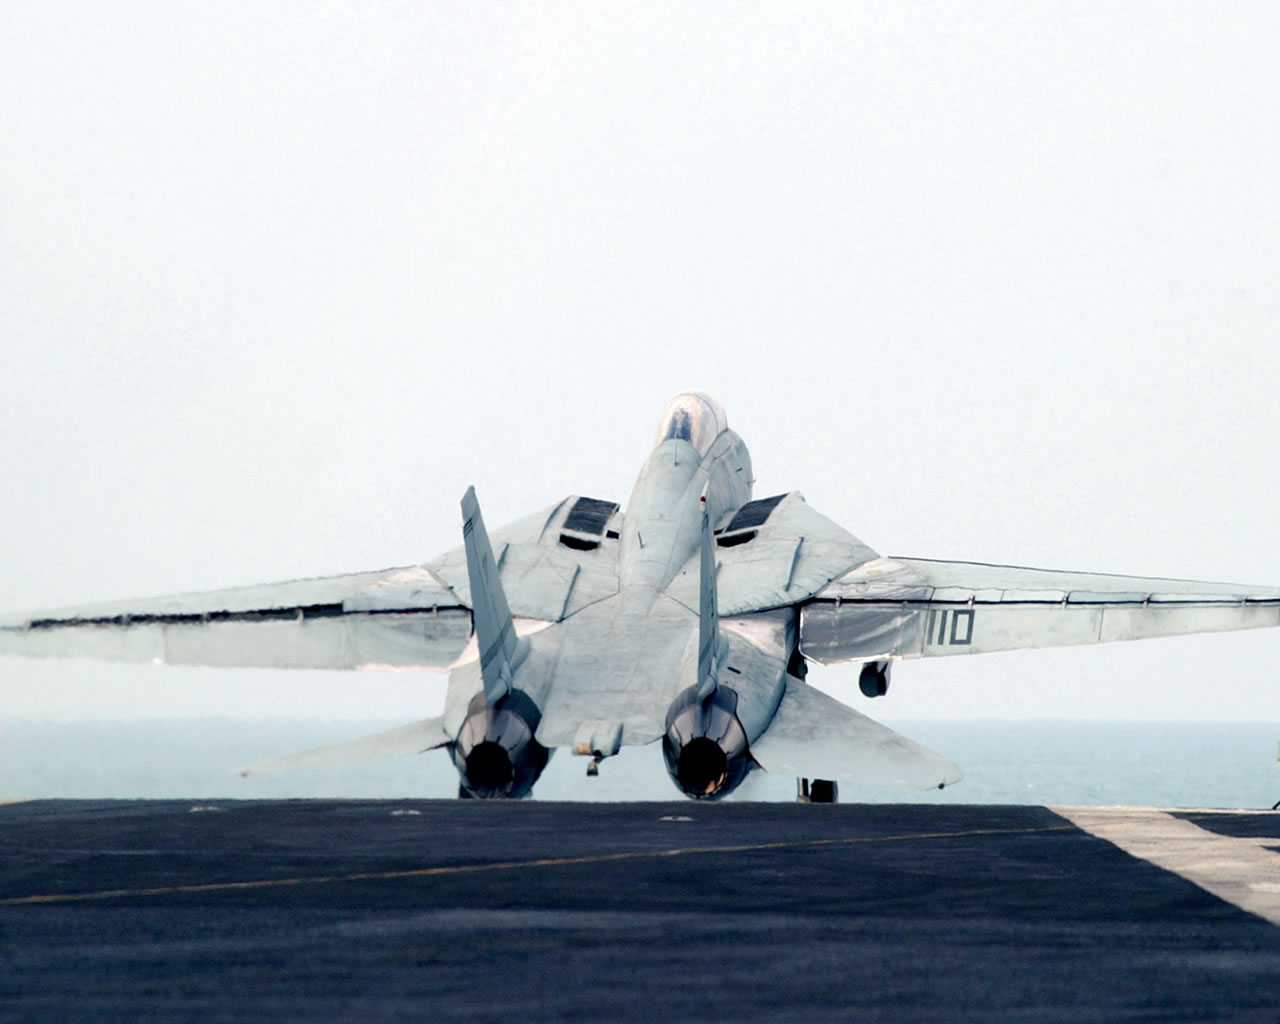 F 14 tomcat wallpaper 3. You are viewing the F4 Tomcat wallpaper named 